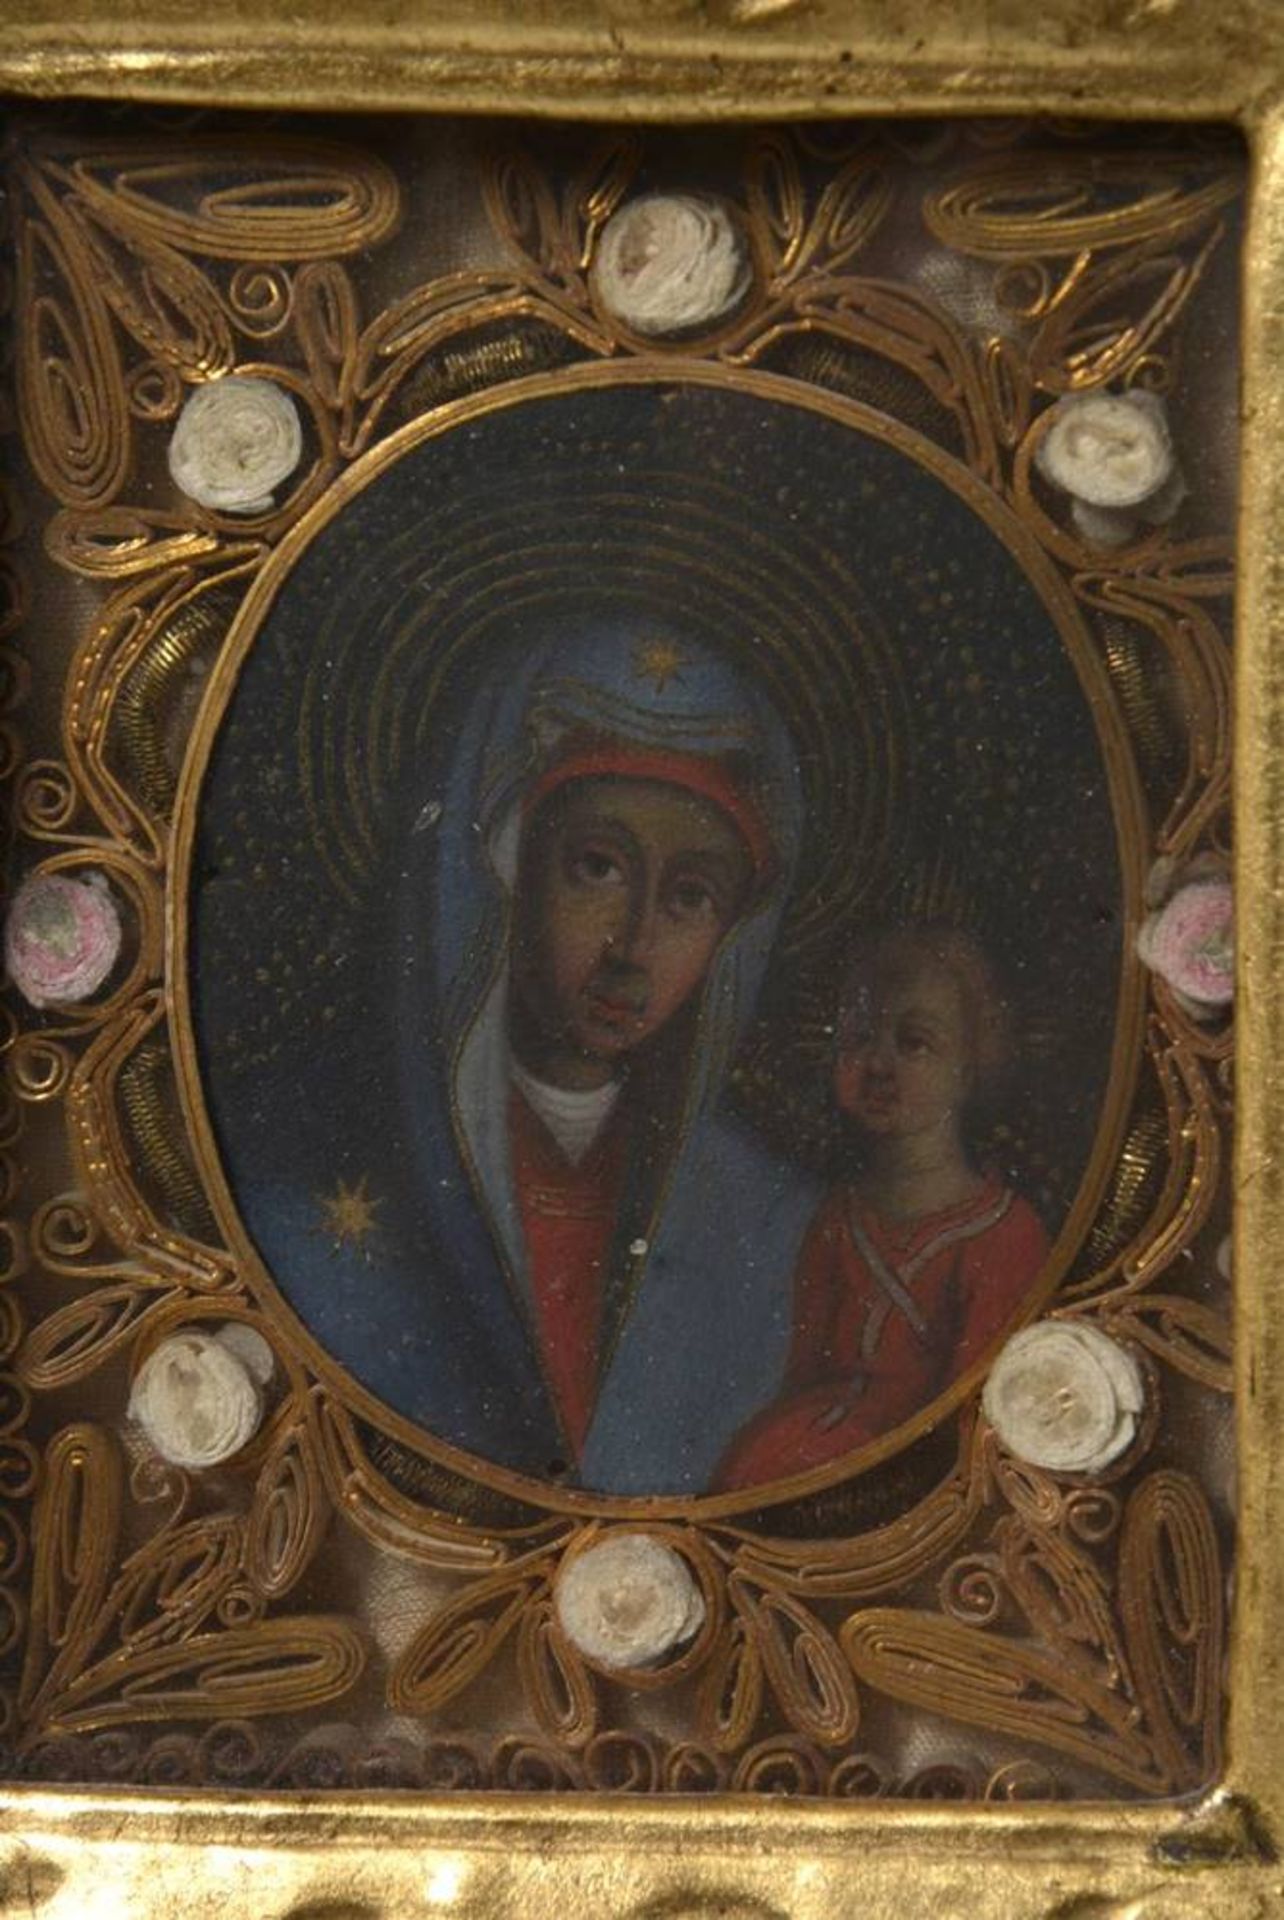 Monastry picture south german, 18th C., virgin Mary with child in carved, gilt frame, HxW: 28x17, - Bild 2 aus 3